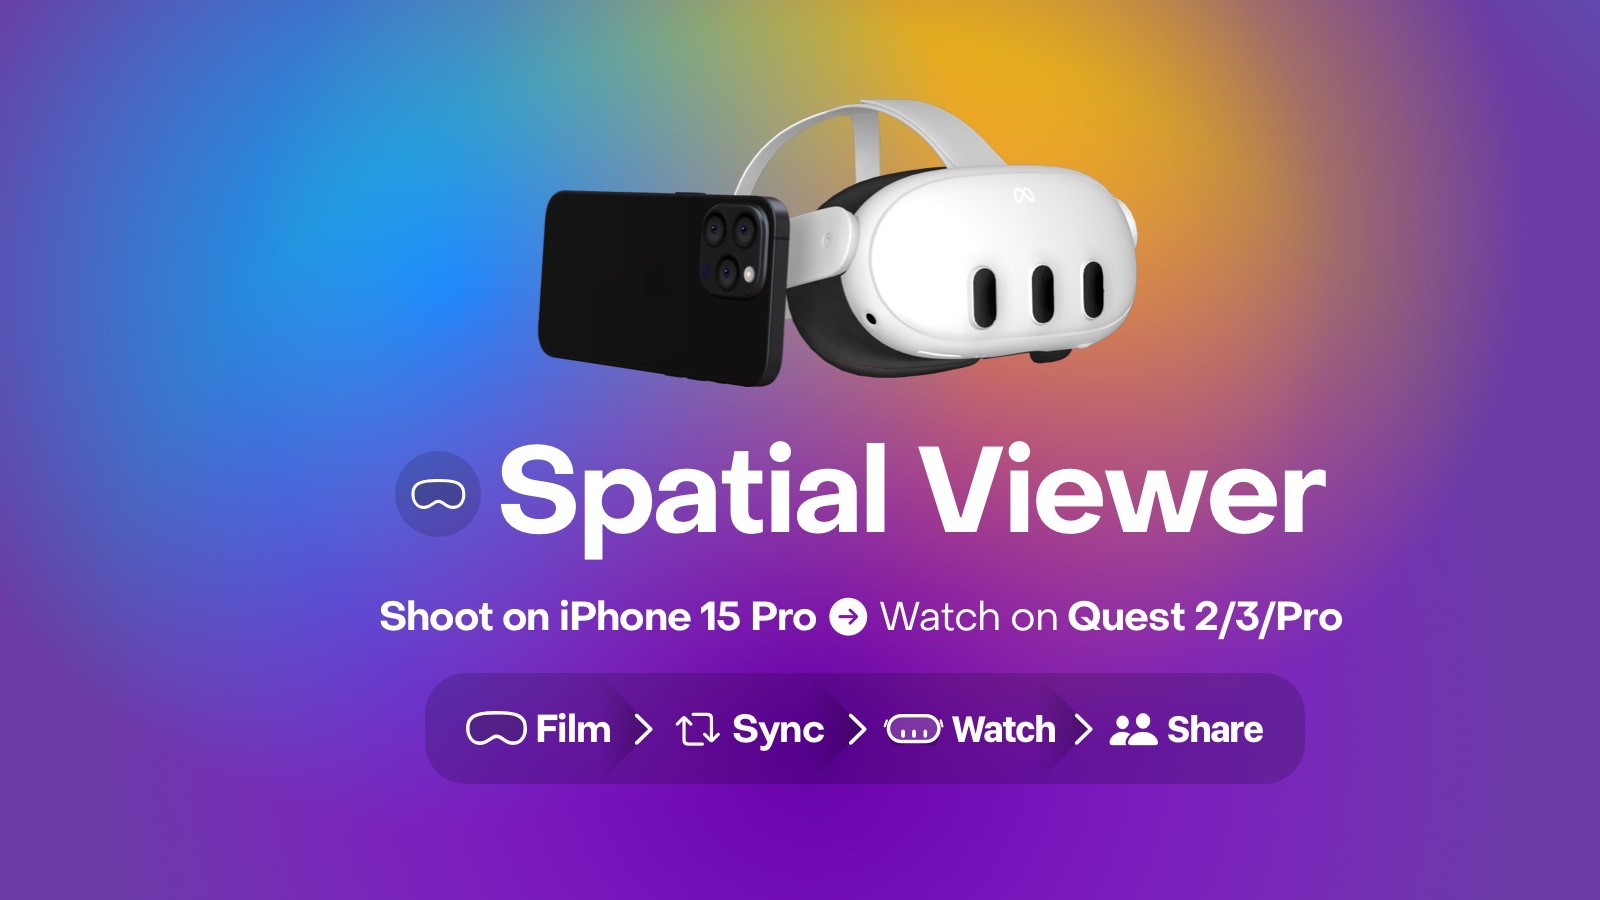 Spatial Viewer is the most straightforward solution to watch Apple’s fancy spatial videos on your Meta Quest headset